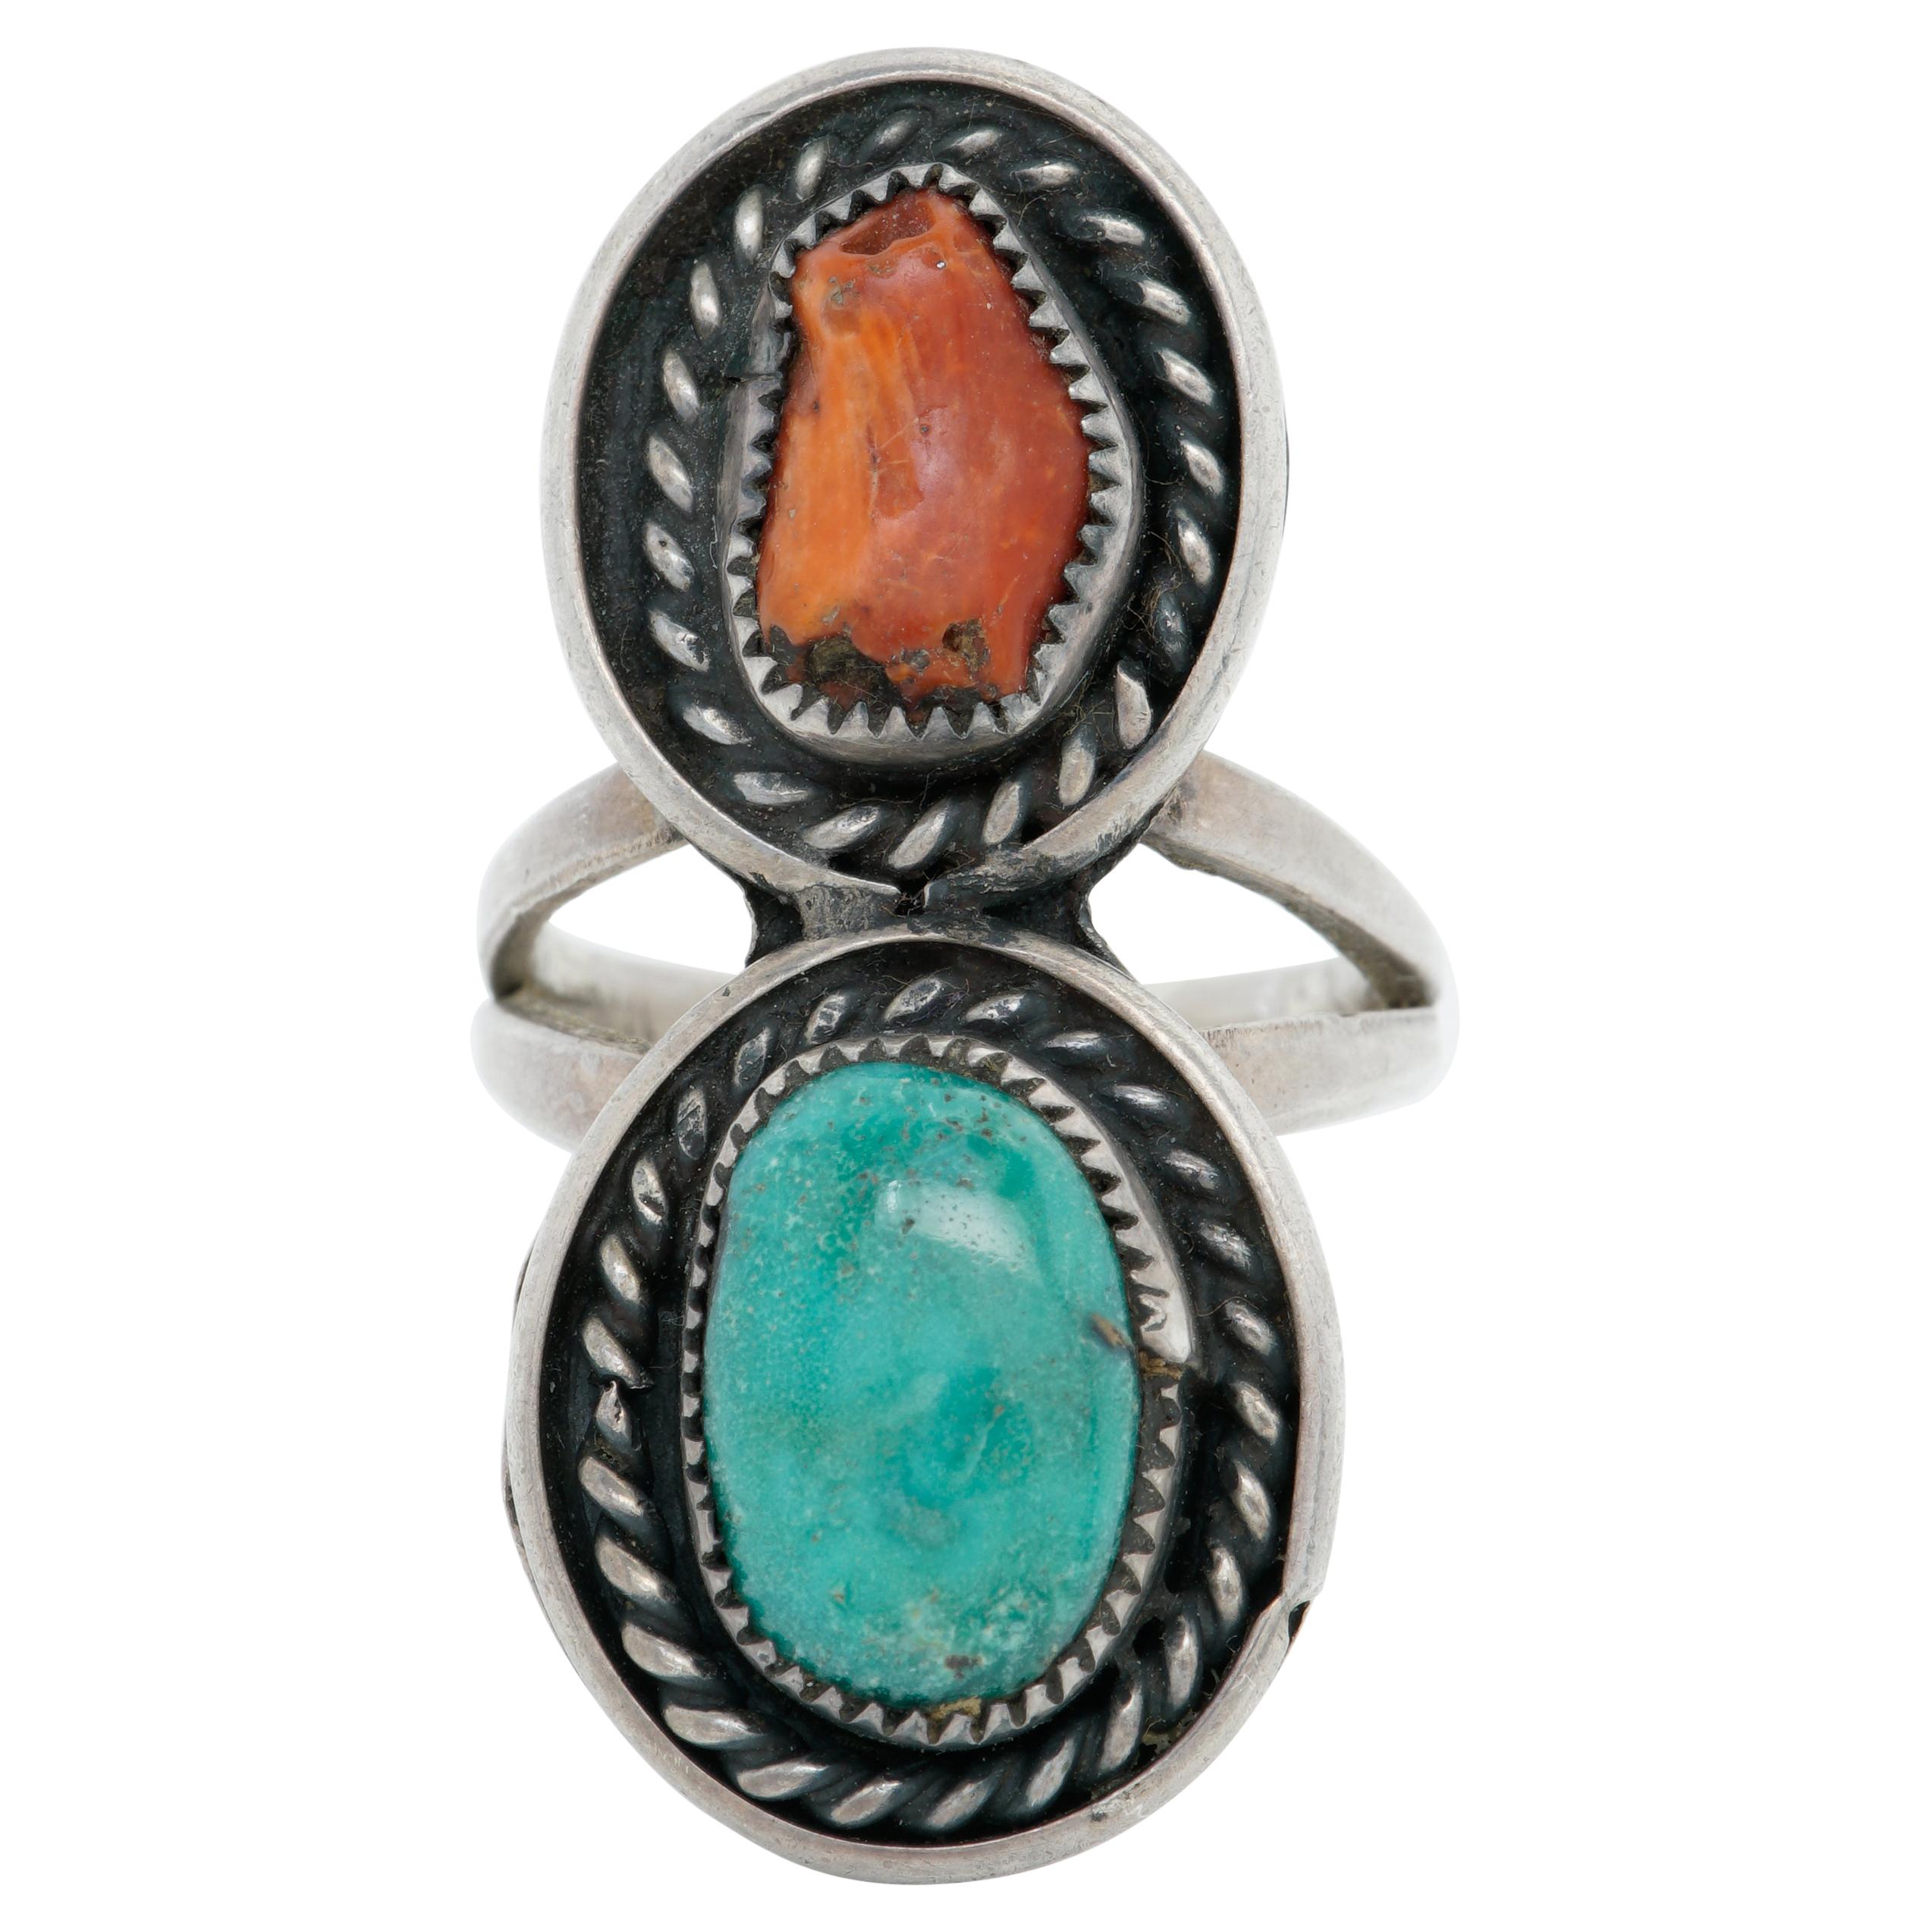 Jane Yikaazba Popovitch Navajo Native American Silver Coral and Turquoise Ring